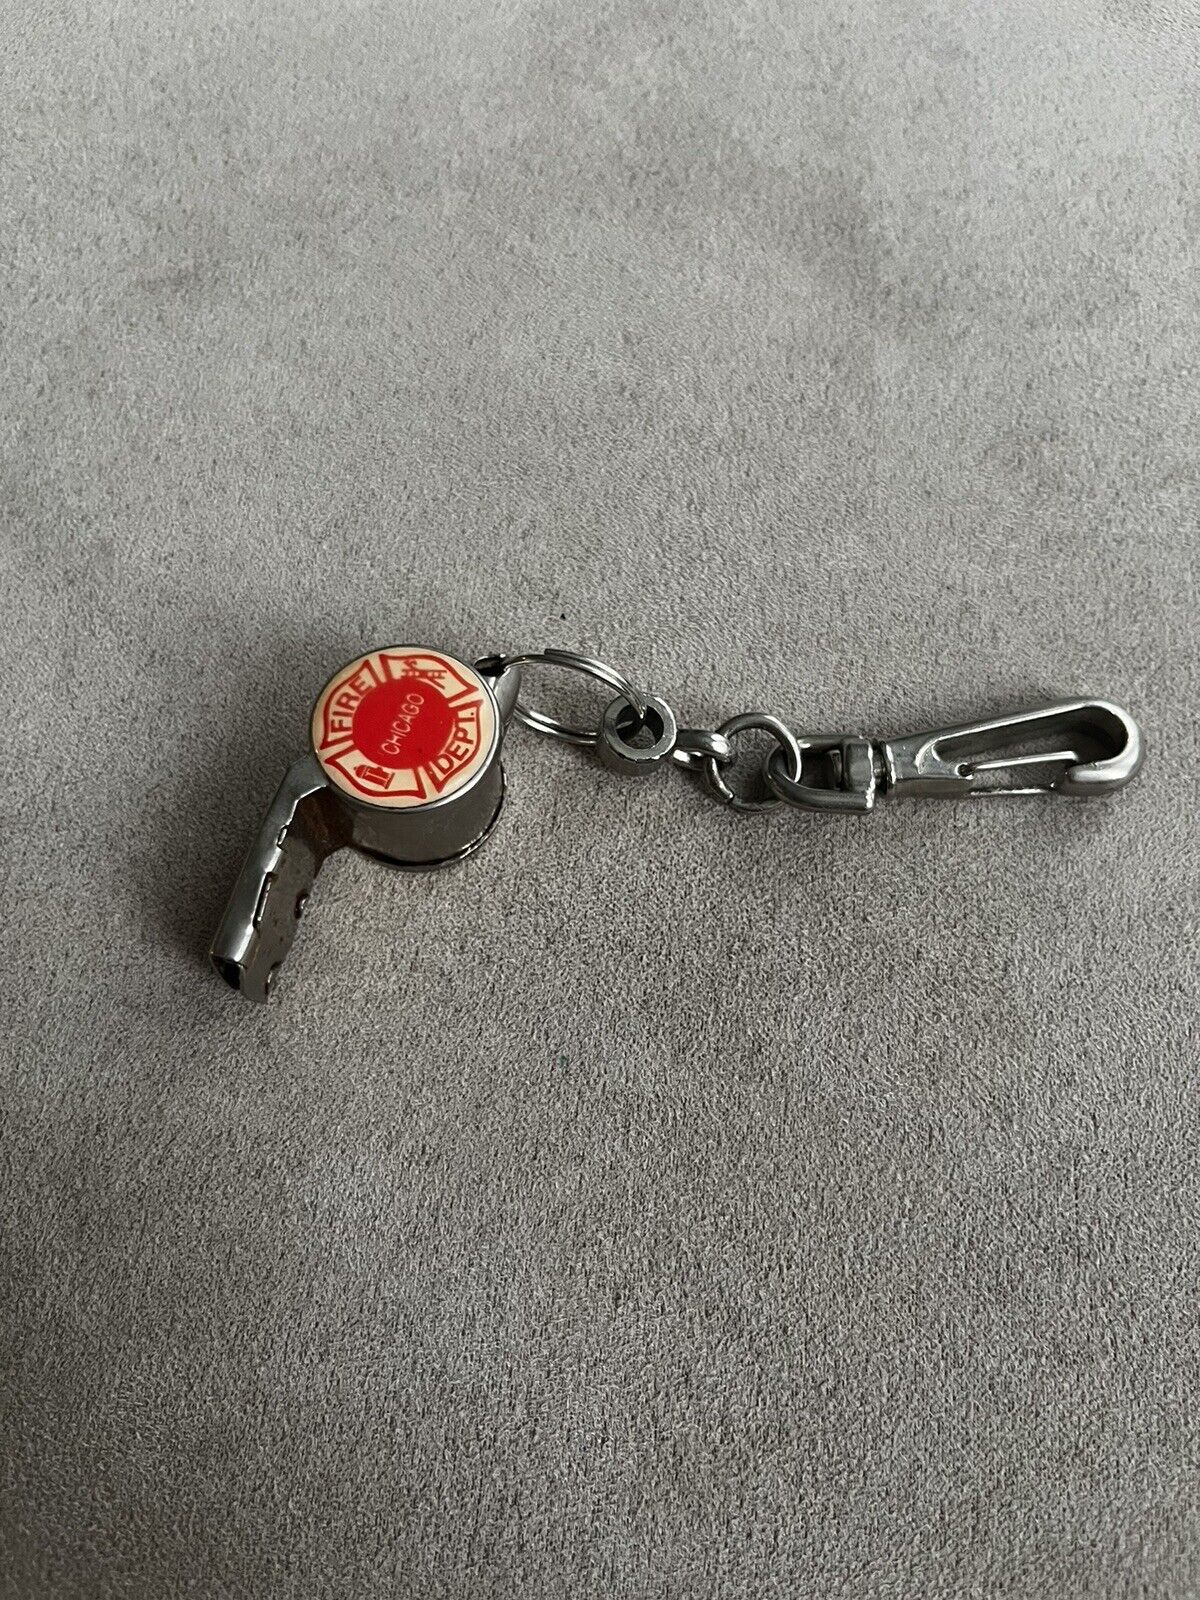 Chicago Fire Department Vintage Metal Whistler On A Keychain